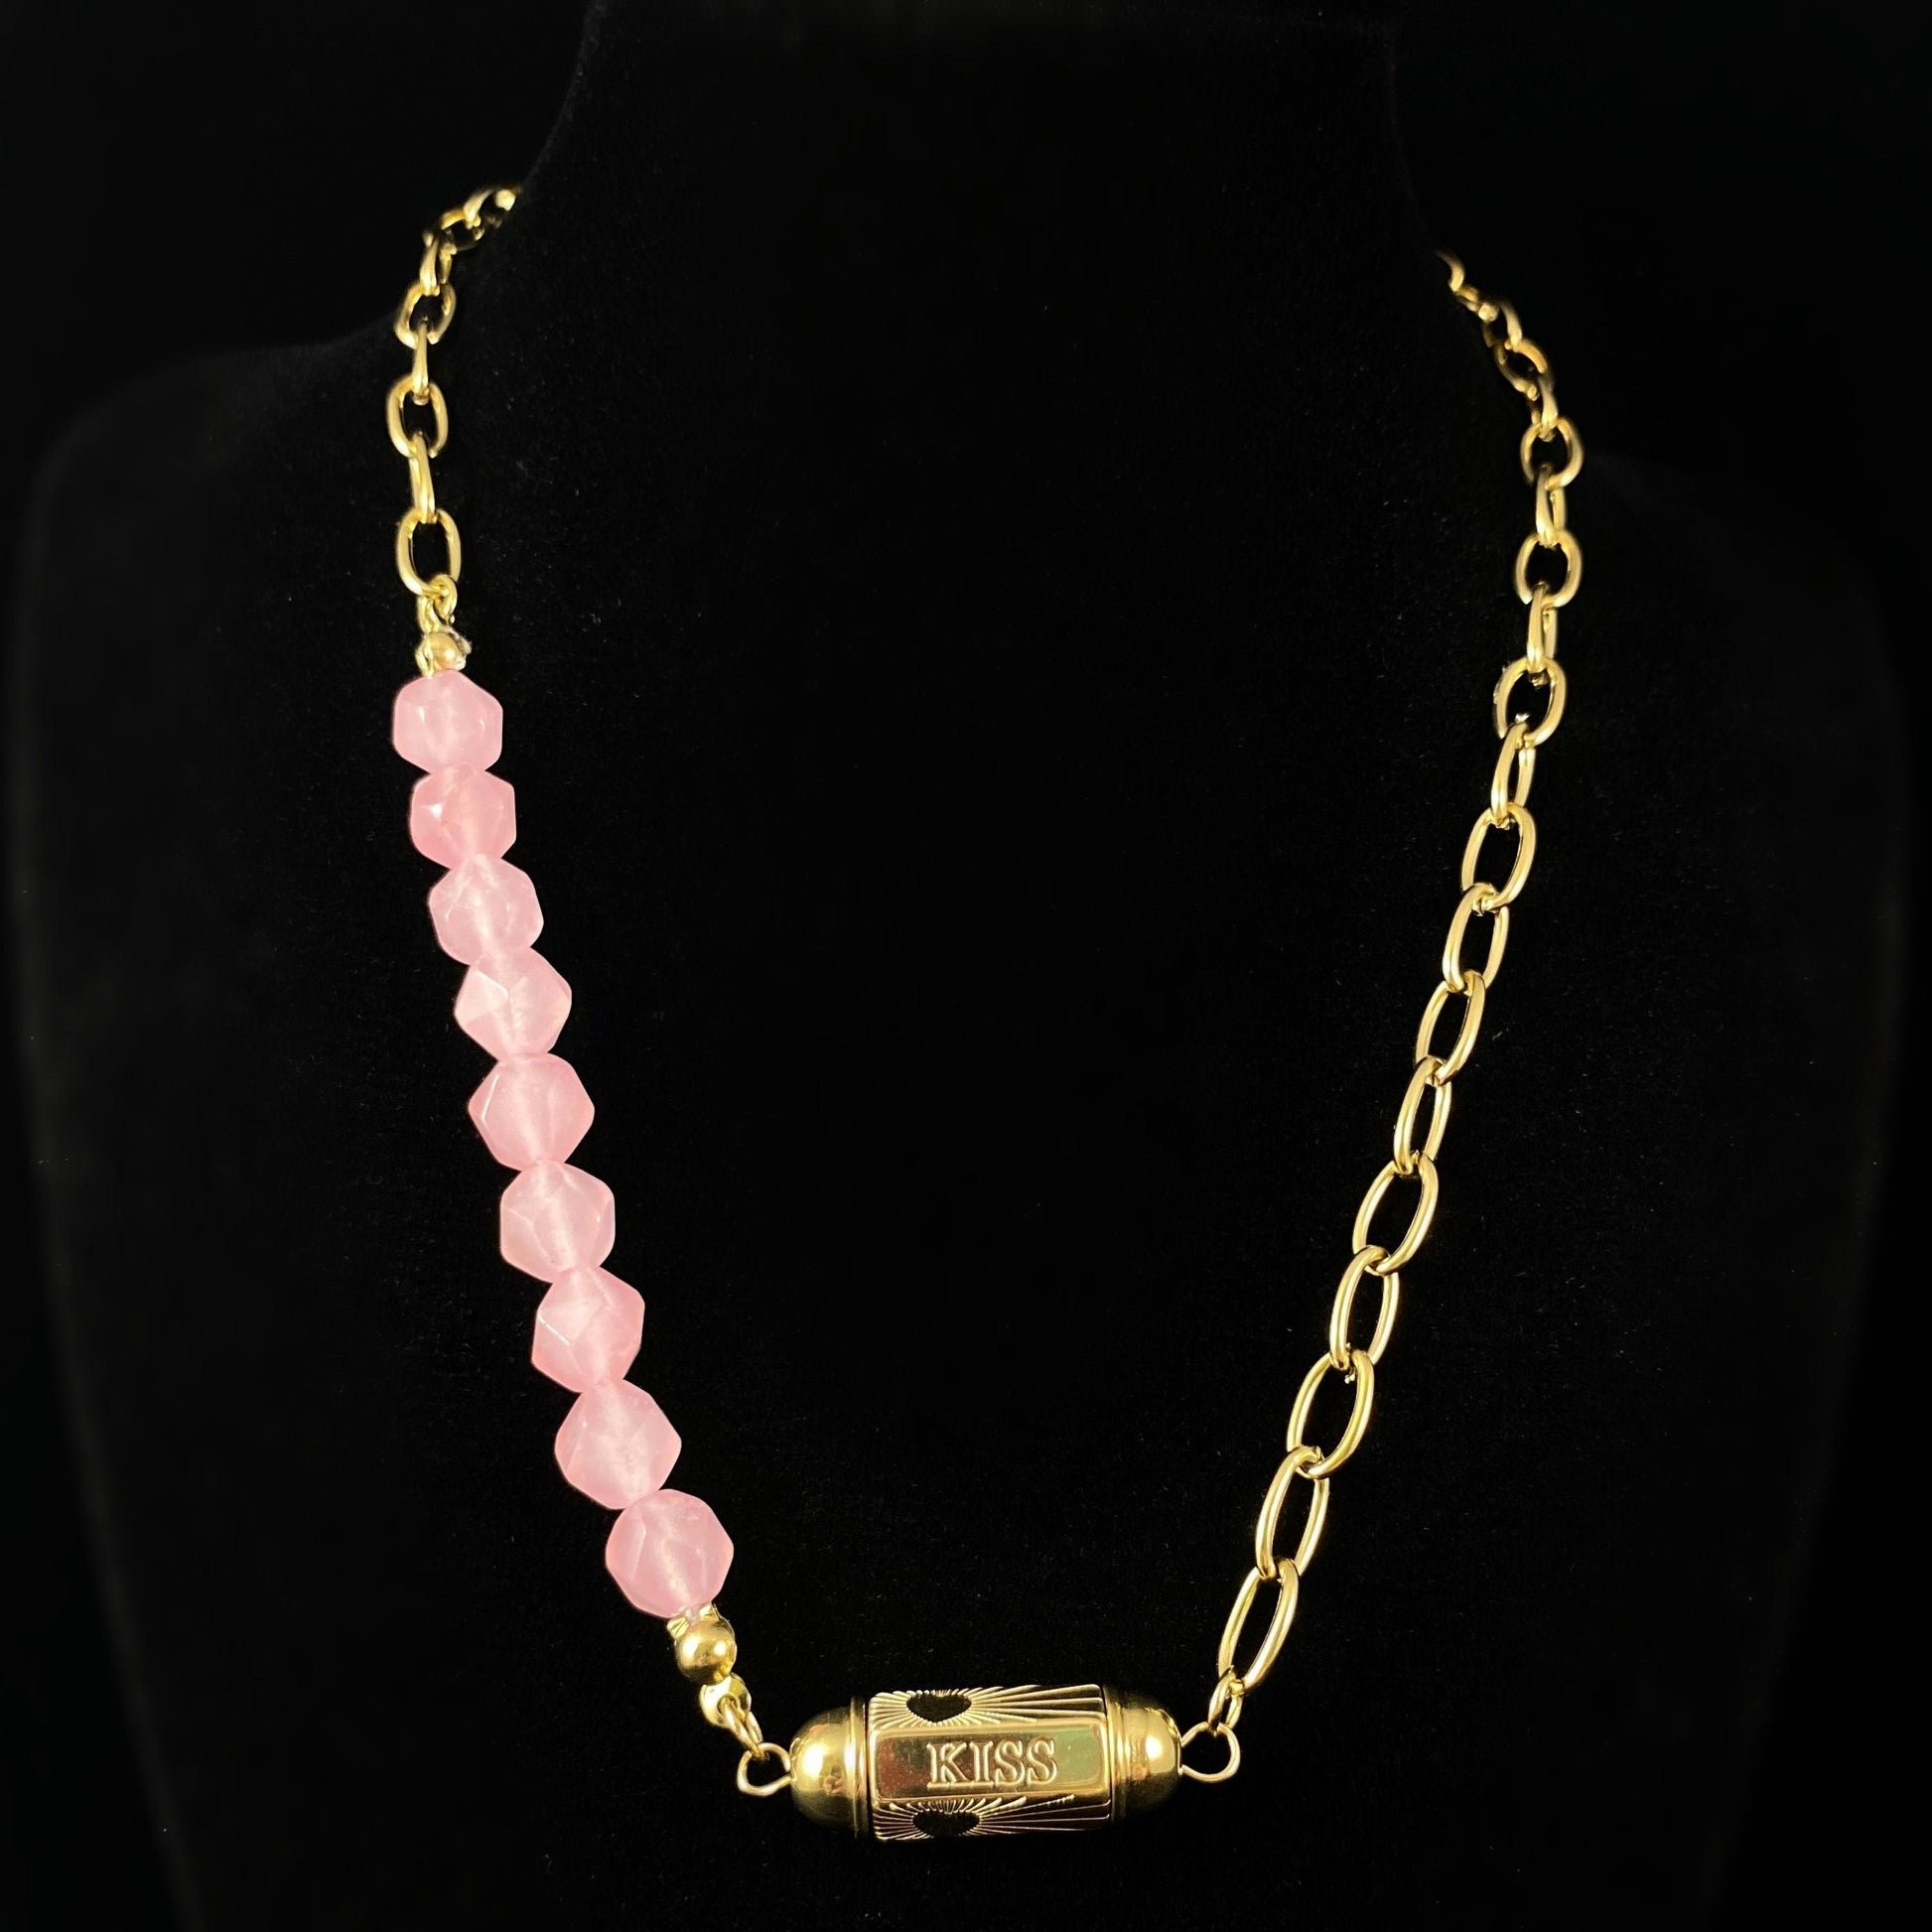 Pink Natural Stone Necklace with Love/Kiss Calligraphy and Dainty Gold Heart Detailing